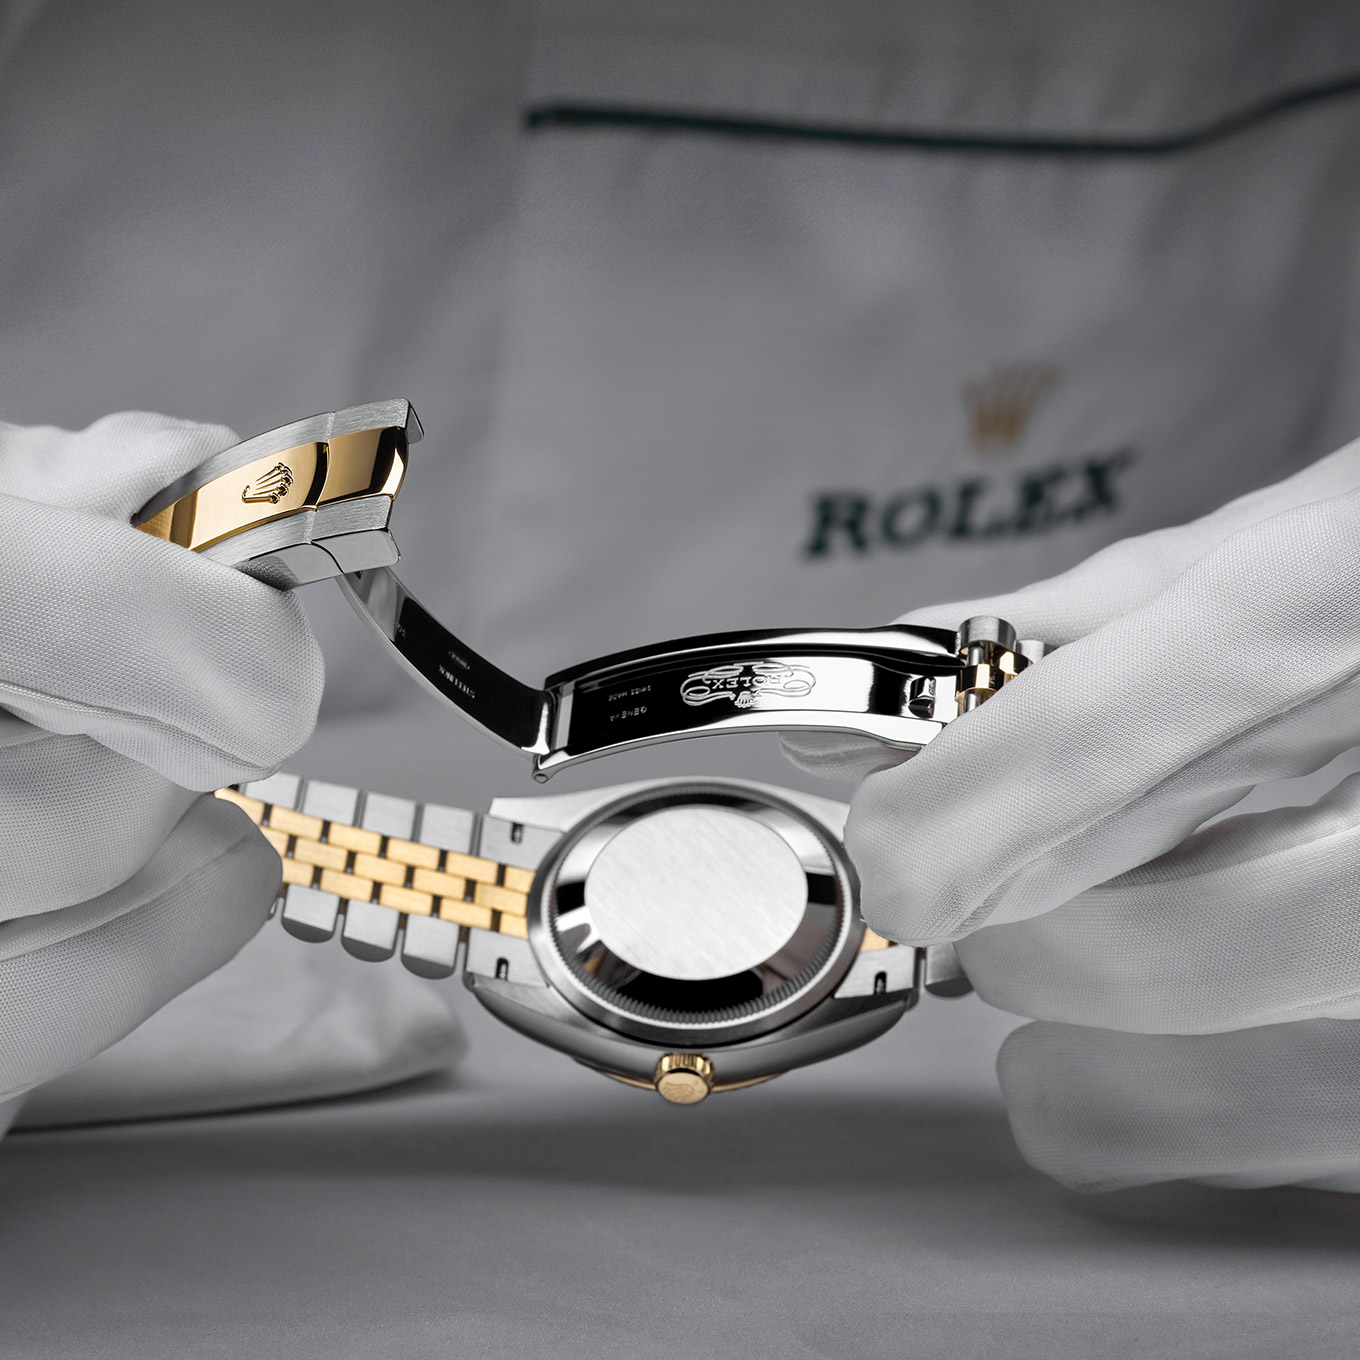 Man unclasping a rolex watch up close image